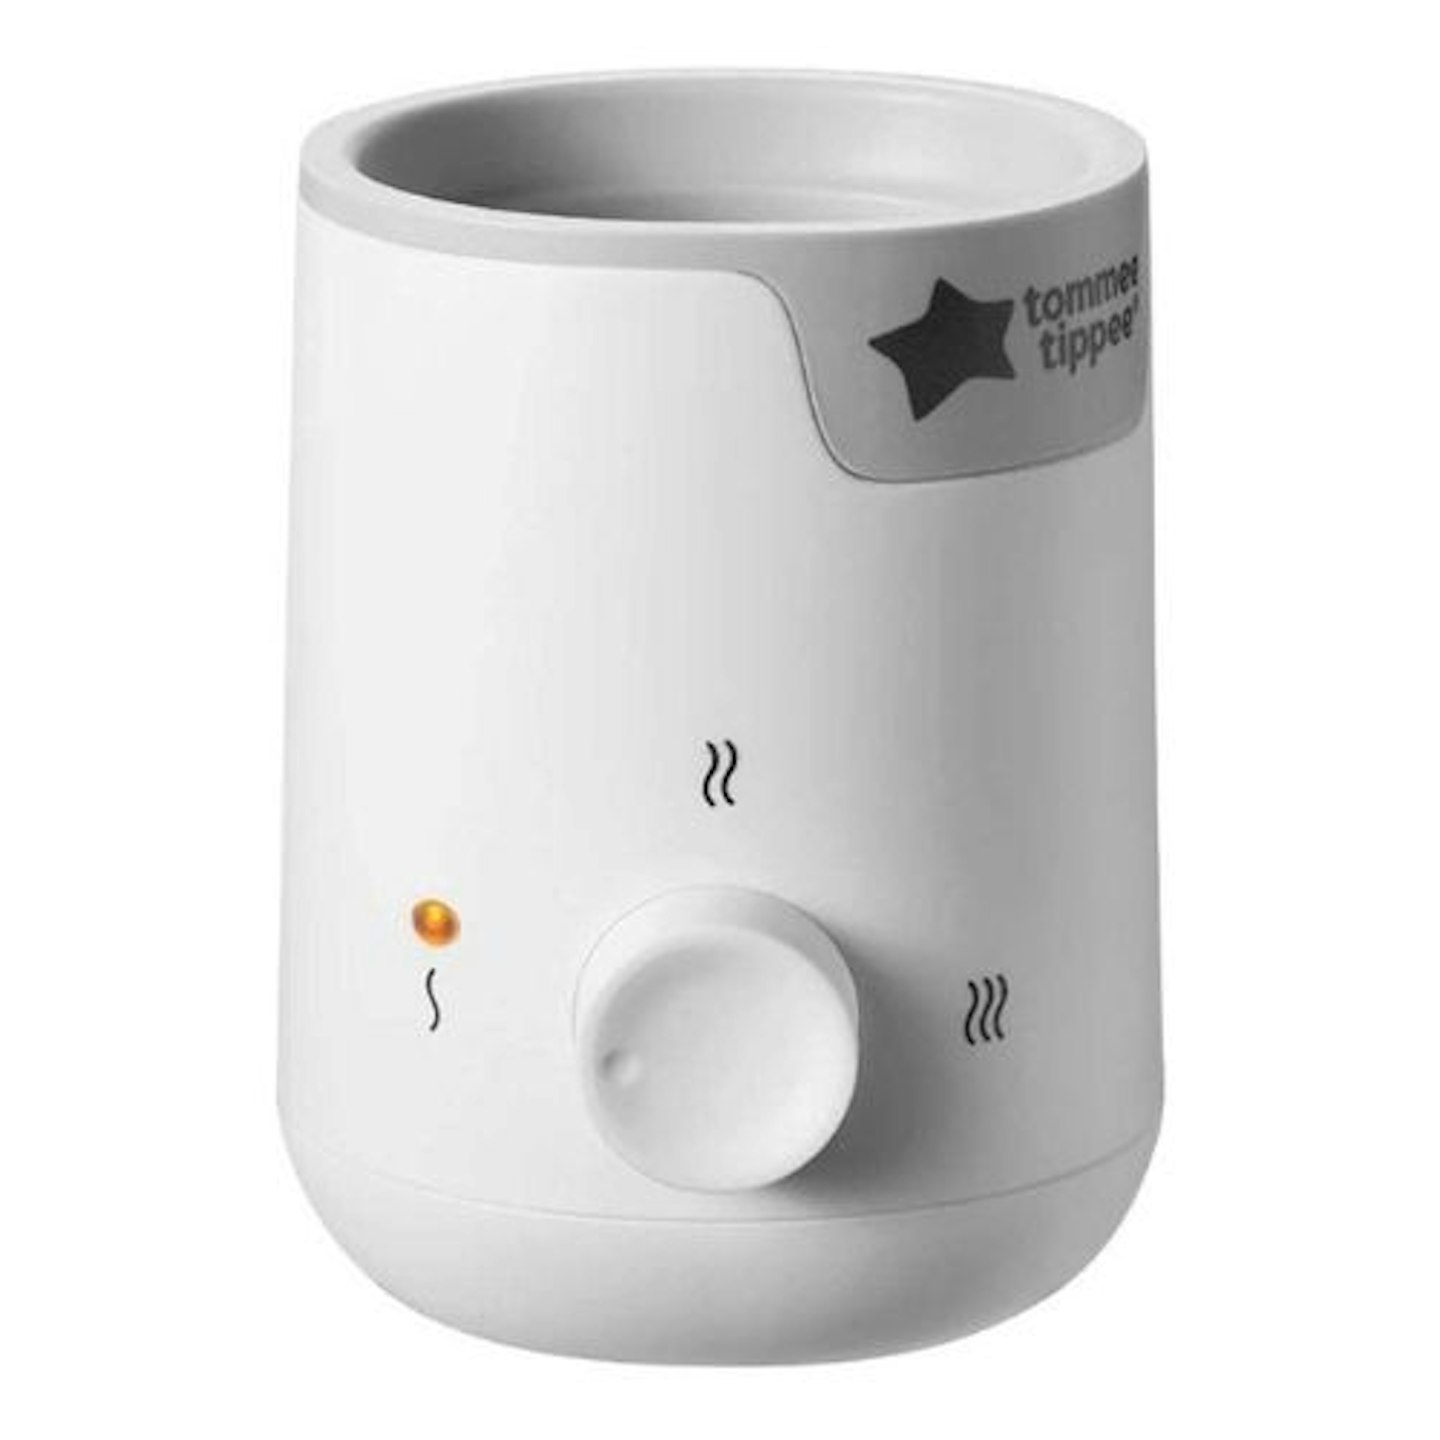 Tommee Tippee 3-in-1 Advanced Electric Bottle and Food Pouch Warmer